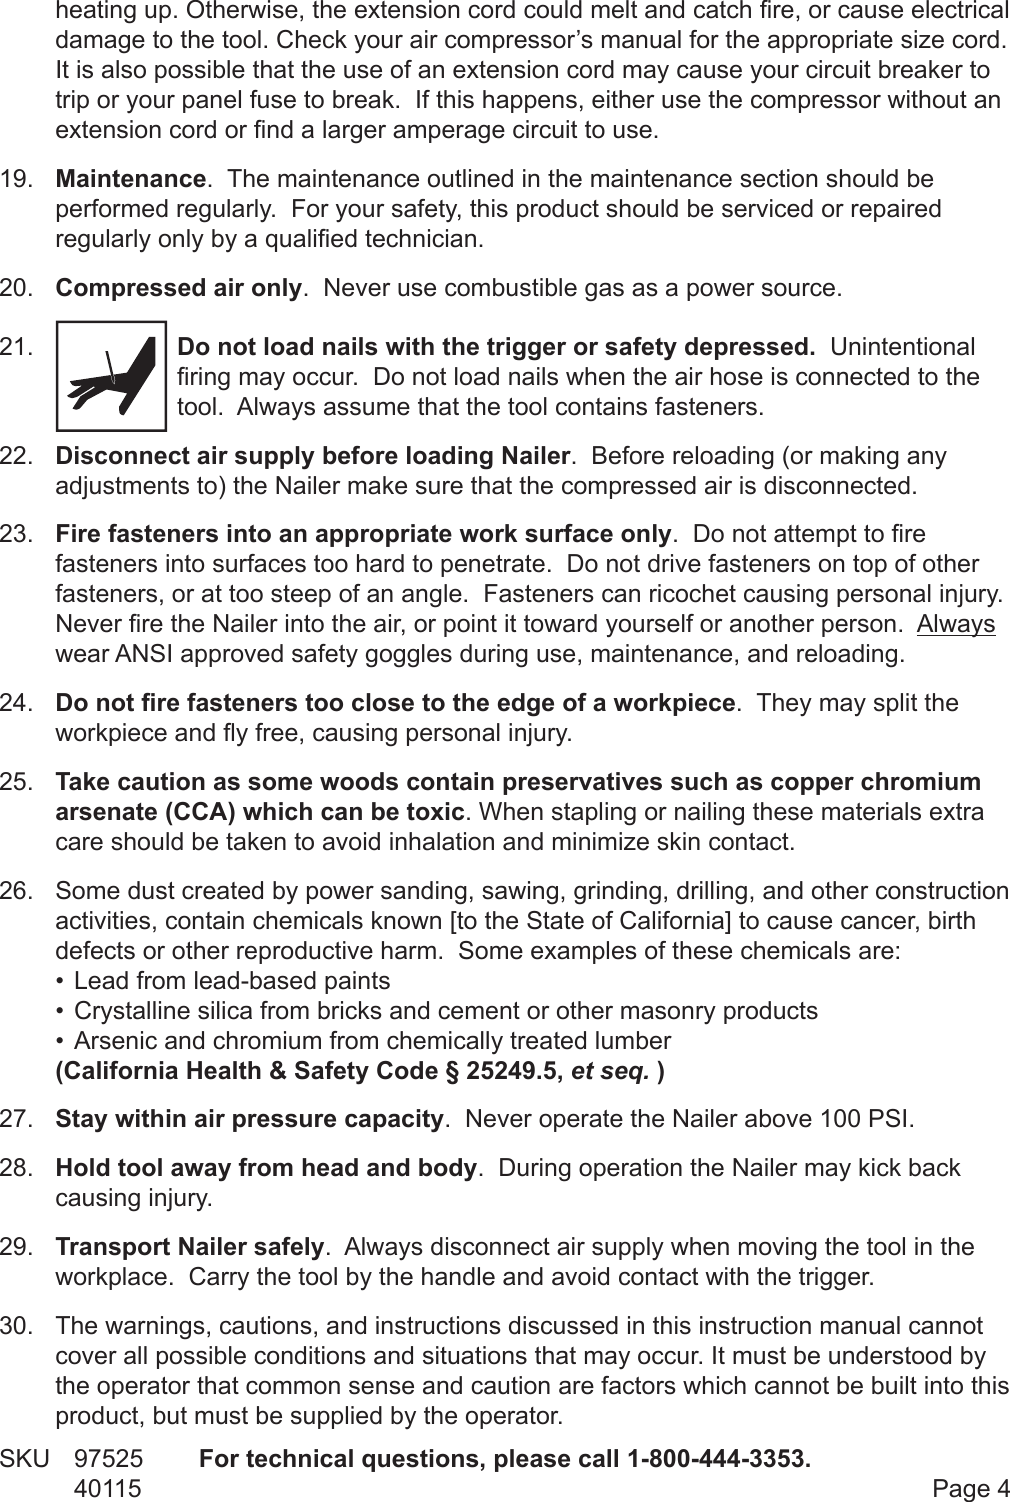 Page 4 of 11 - Central-Pneumatic Central-Pneumatic-Nail-Gun-40115-Users-Manual-  Central-pneumatic-nail-gun-40115-users-manual